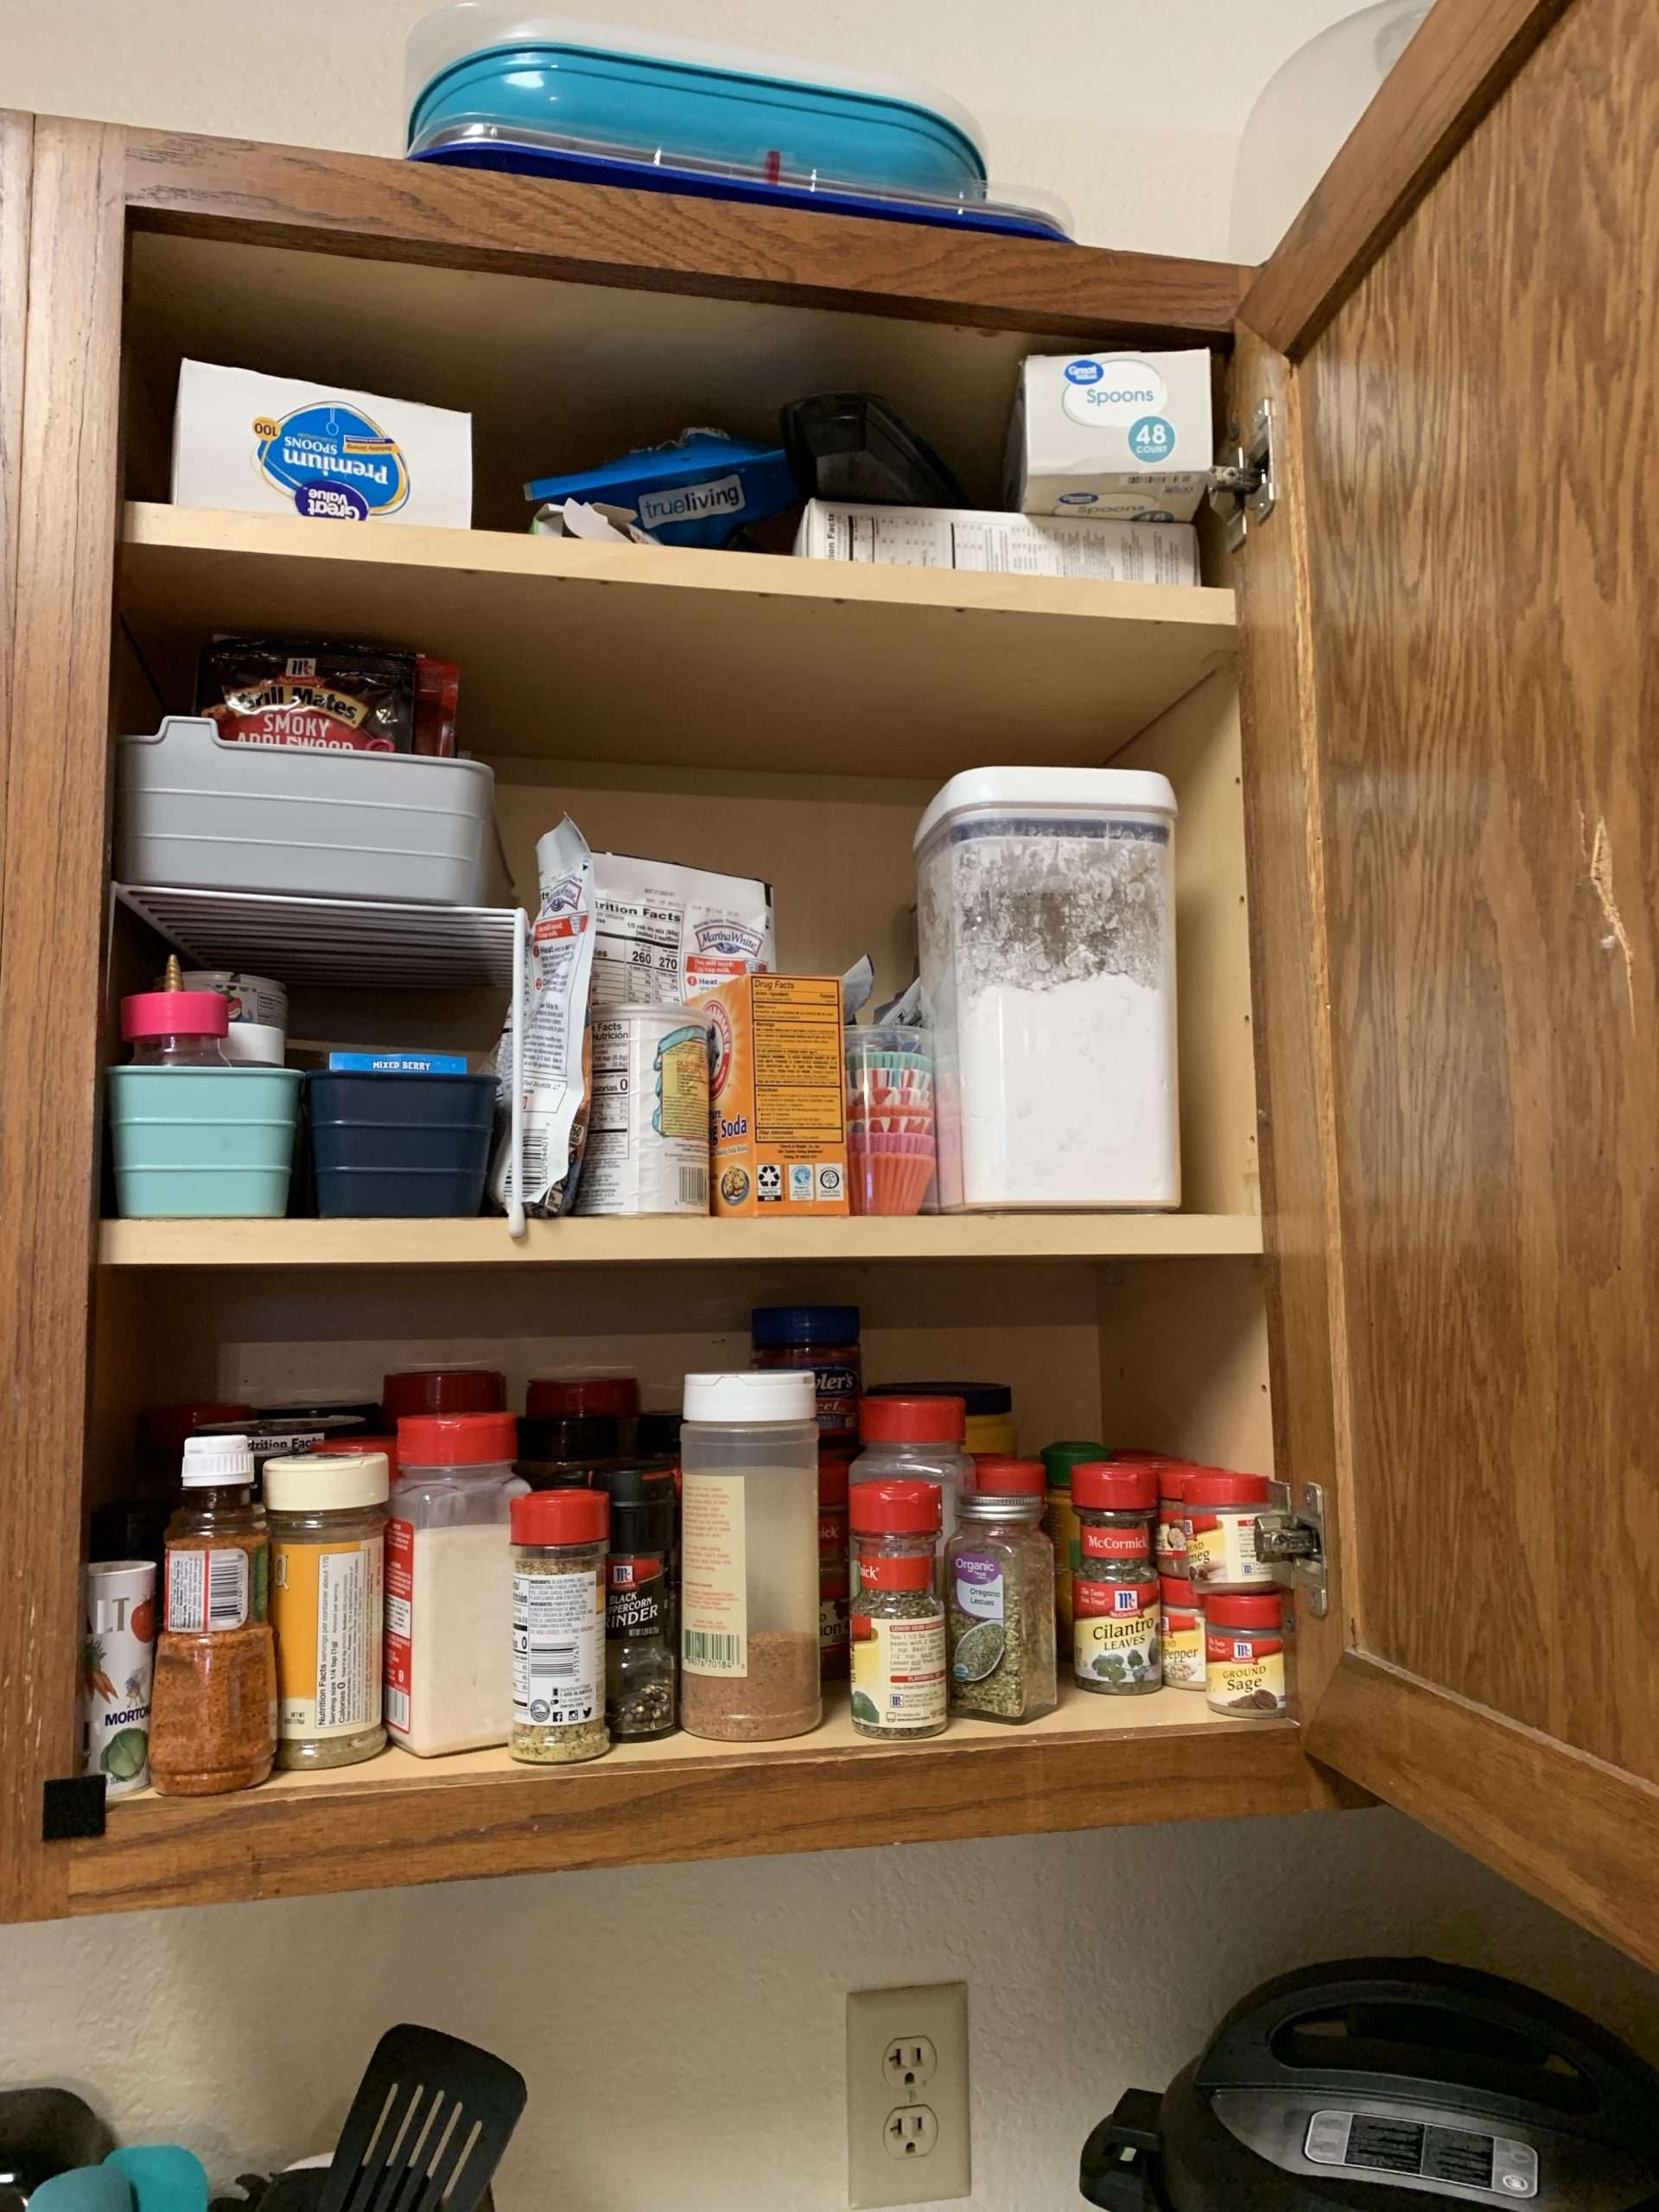 The before picture of my messy spice cabinet